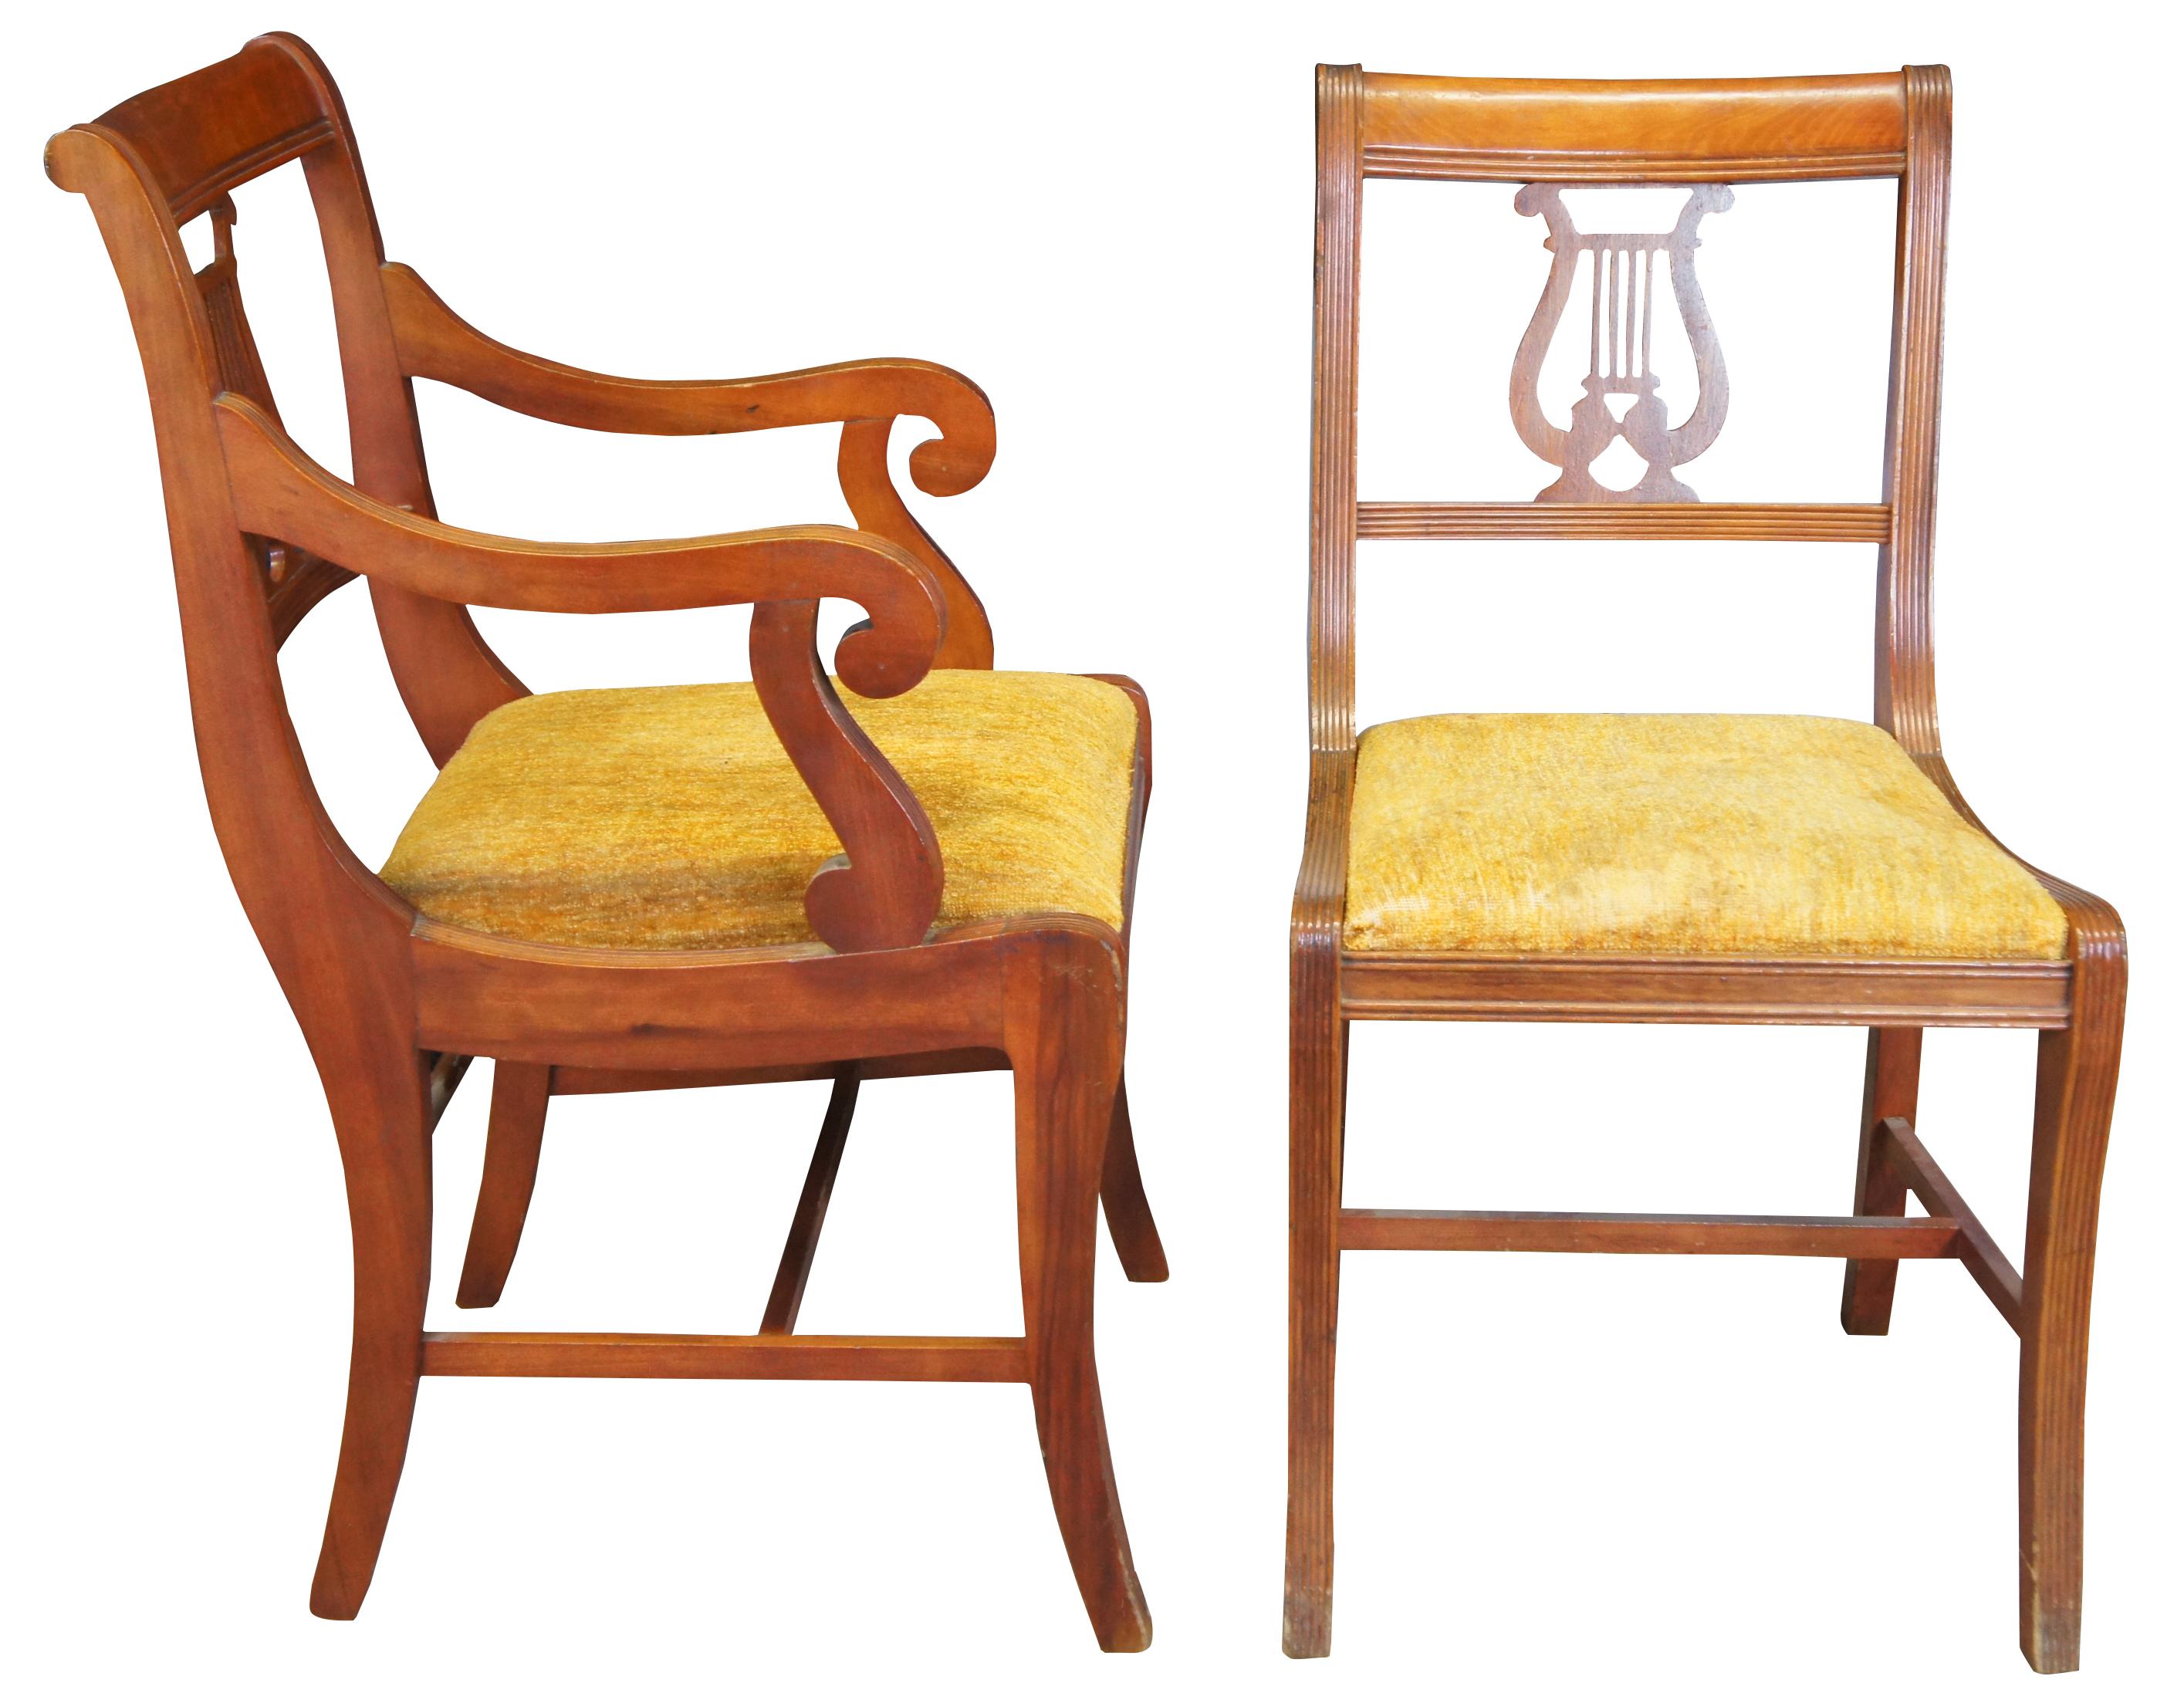 Six Duncan Phyfe dining chairs, circa mid 20th century. Made of mahogany featuring serpentine form with a lyre/harp back and fluted accents. 705-185, H-6746.

Measures: 21